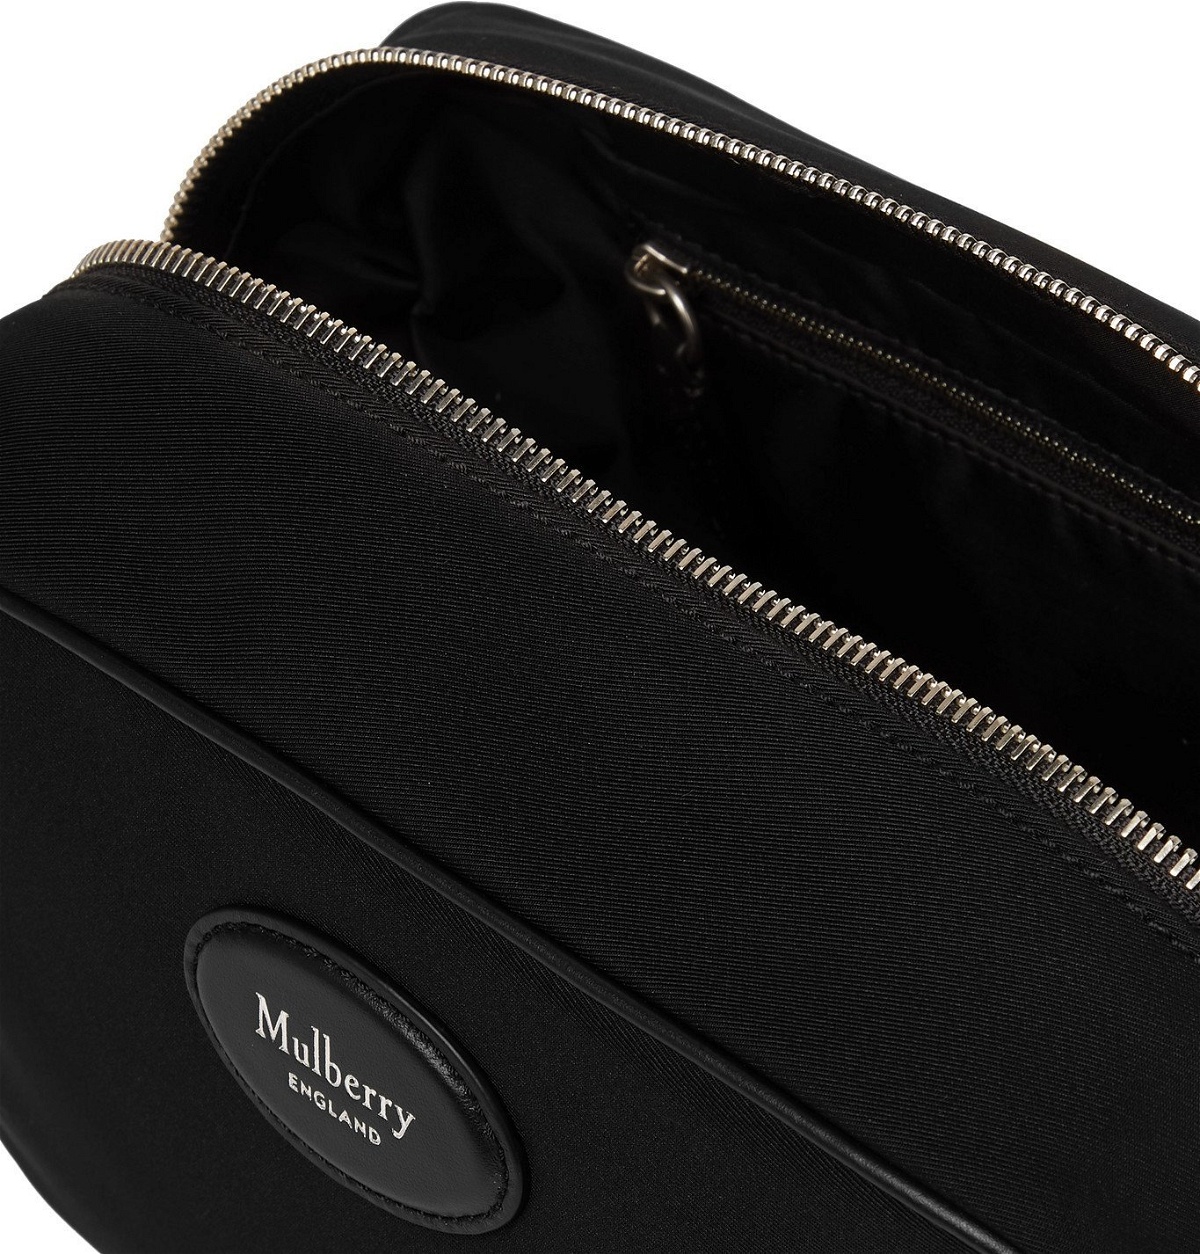 MULBERRY - Leather-Trimmed Nylon Wash Bag - Black Mulberry